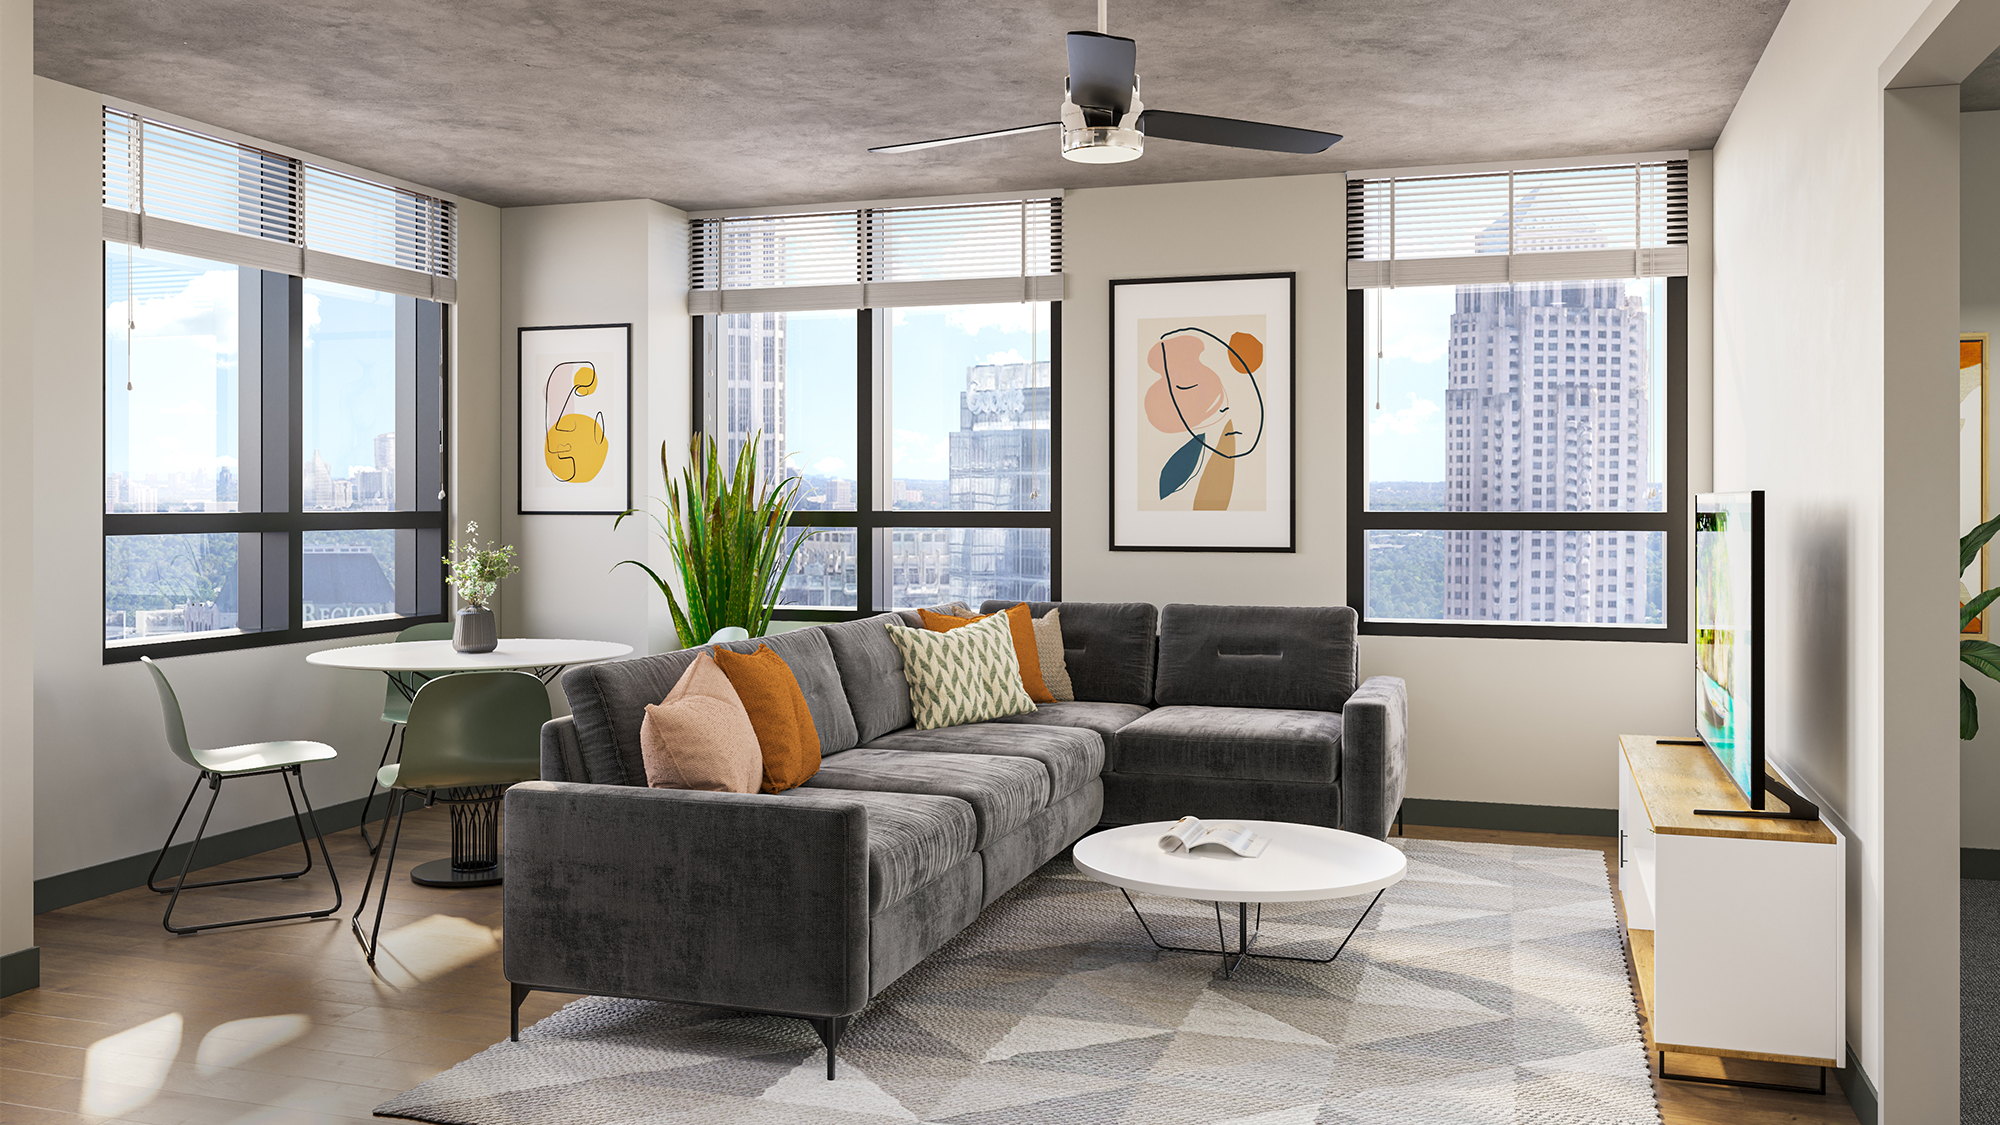 Apartment living room with large windows, ceiling fan, and gray couch. A table and chairs are in the corner behind the couch.